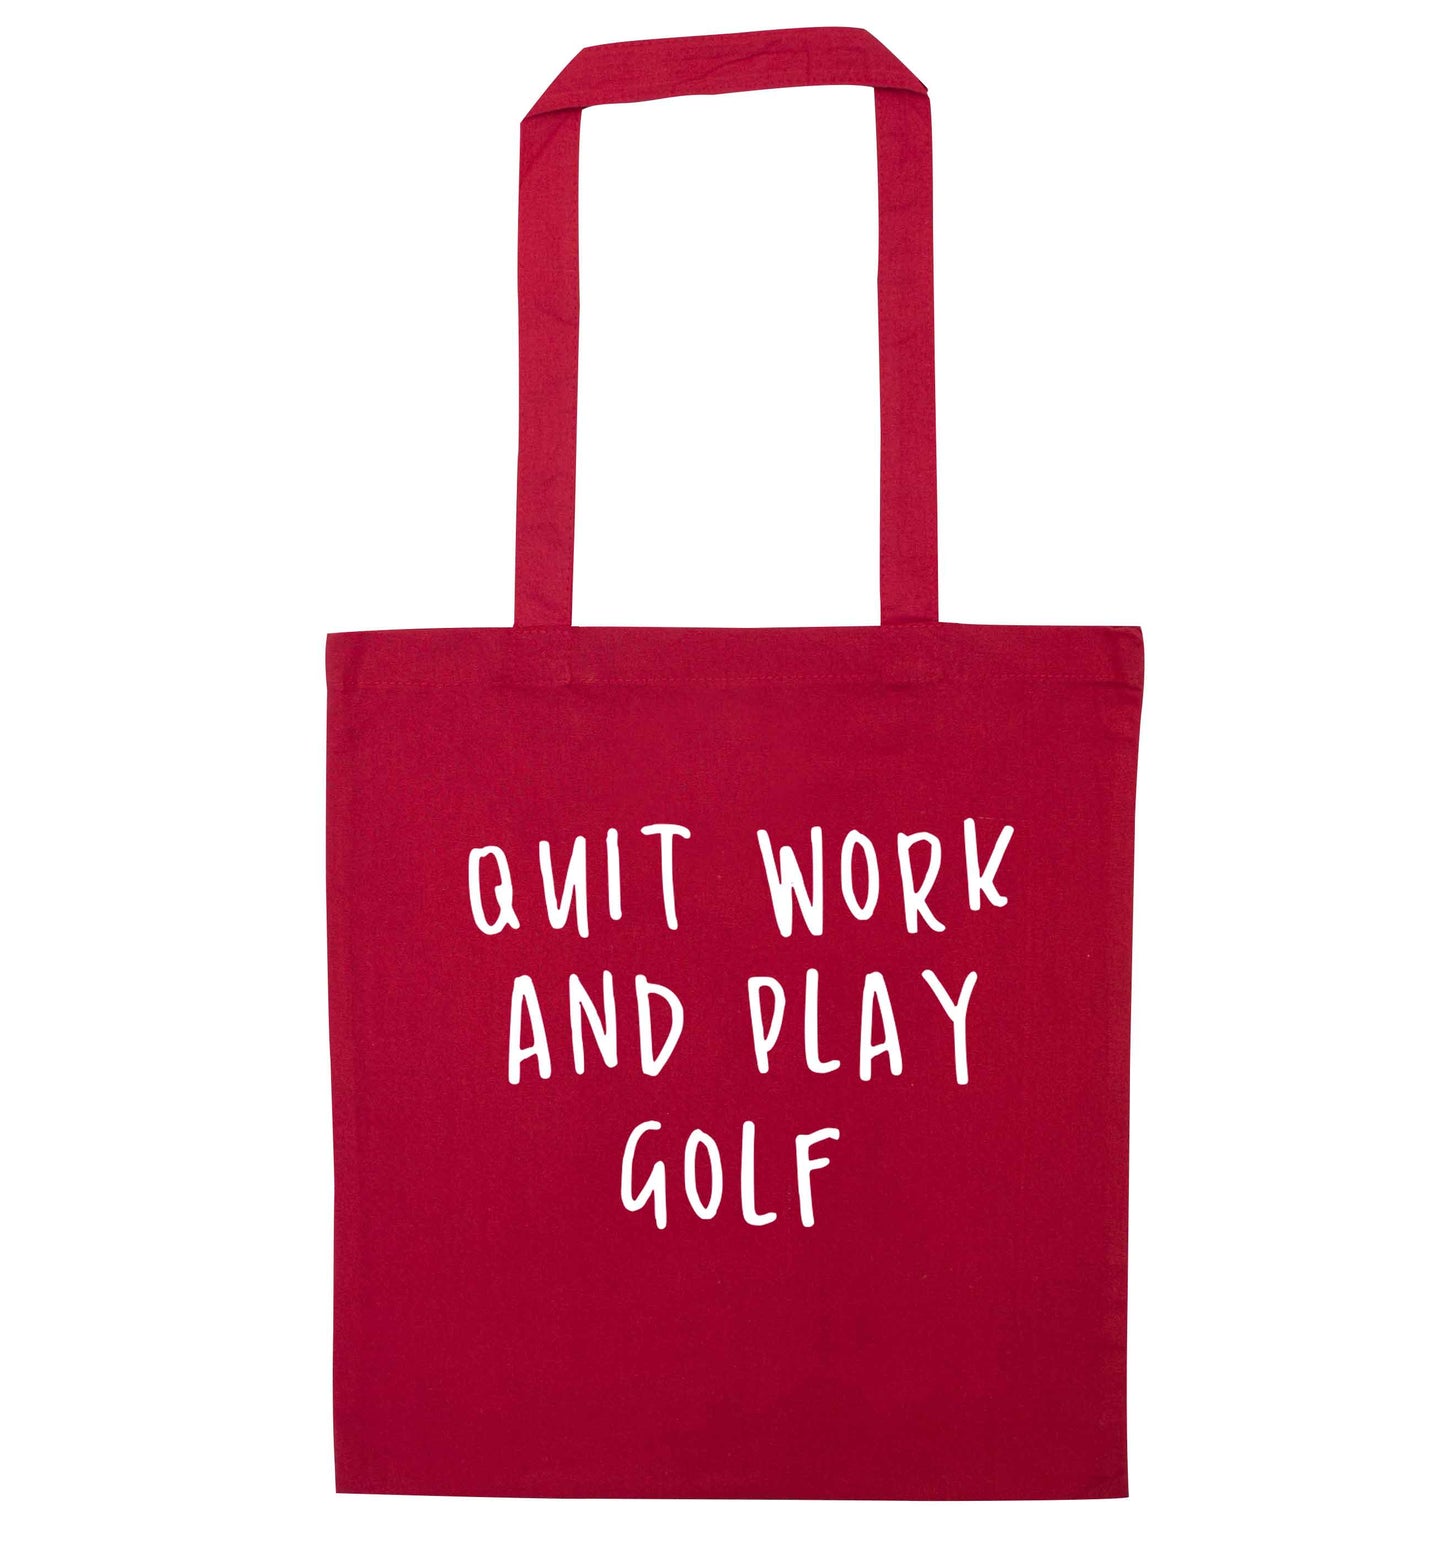 Quit work and play golf red tote bag